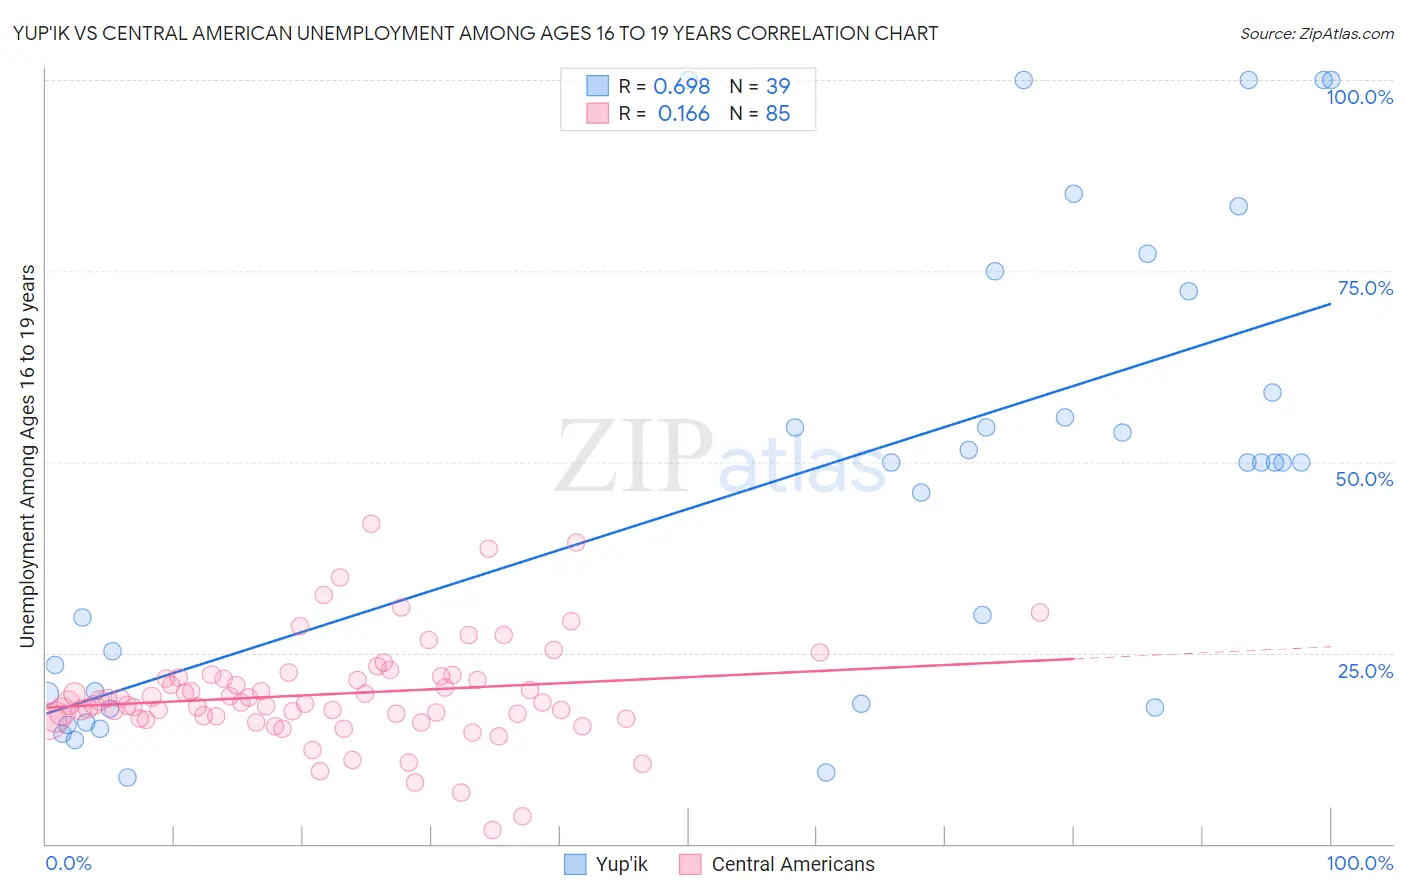 Yup'ik vs Central American Unemployment Among Ages 16 to 19 years